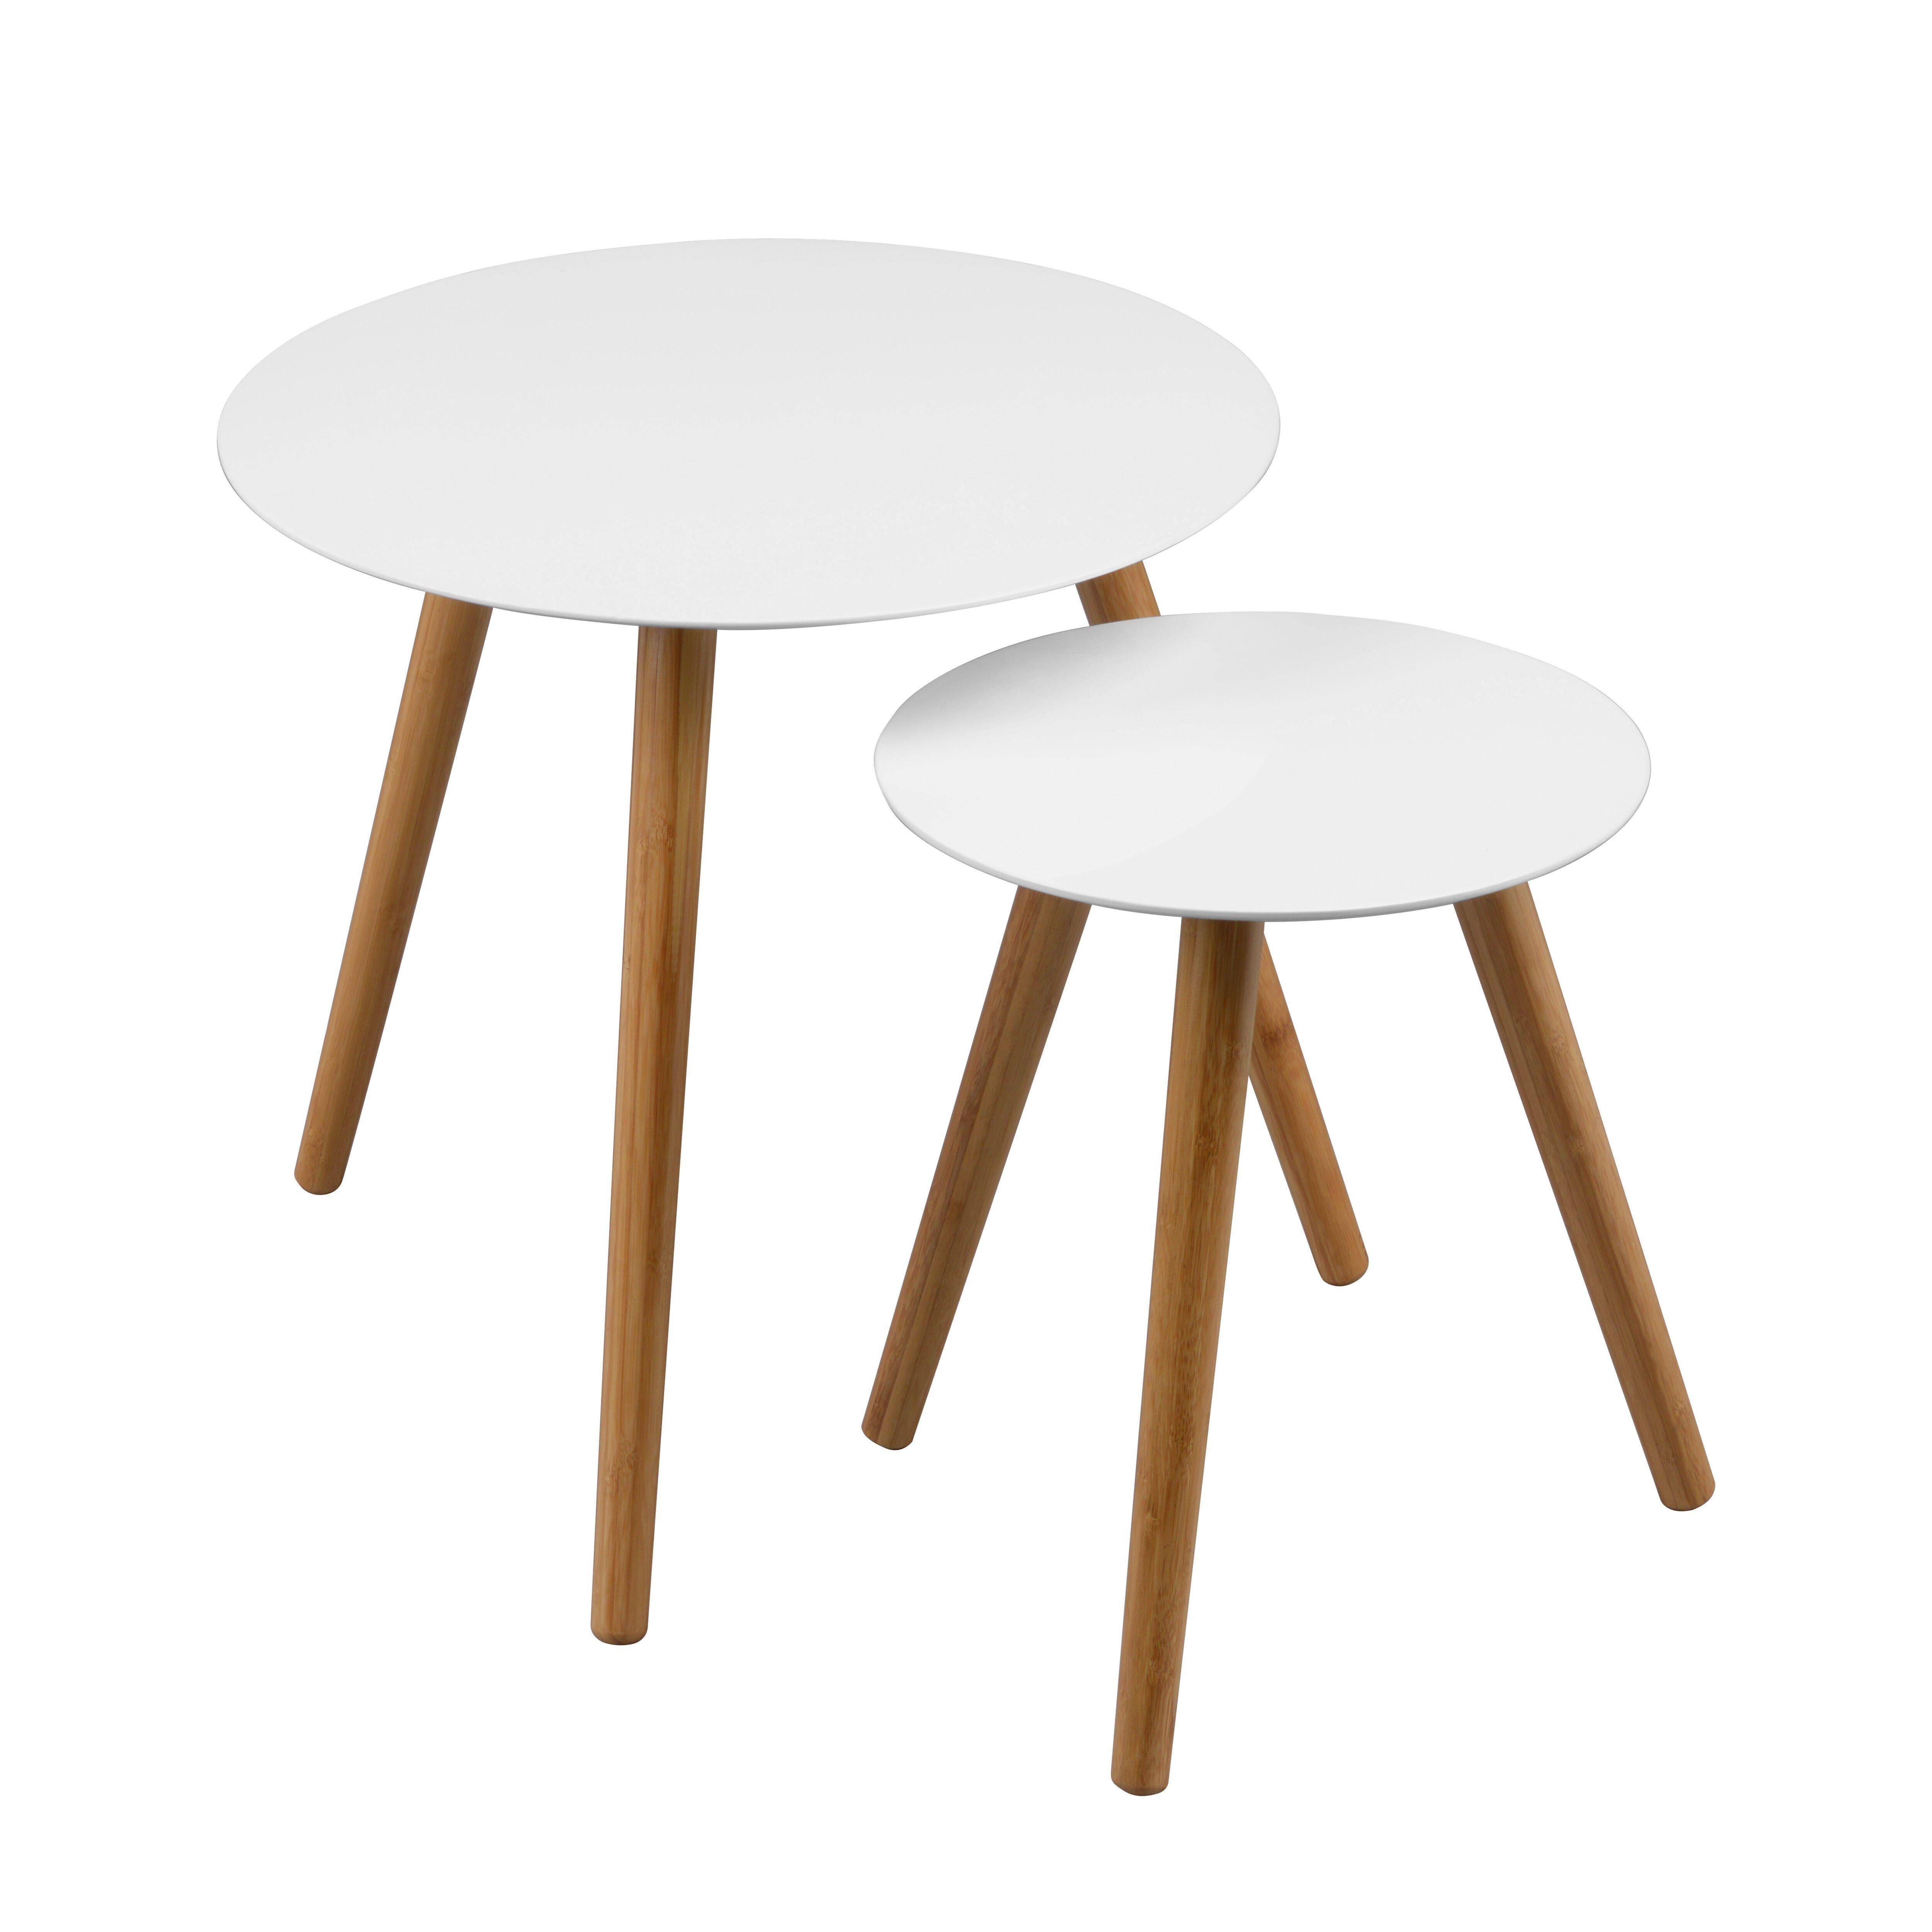 Nostra Nest Of 2 Round Tables - image 1